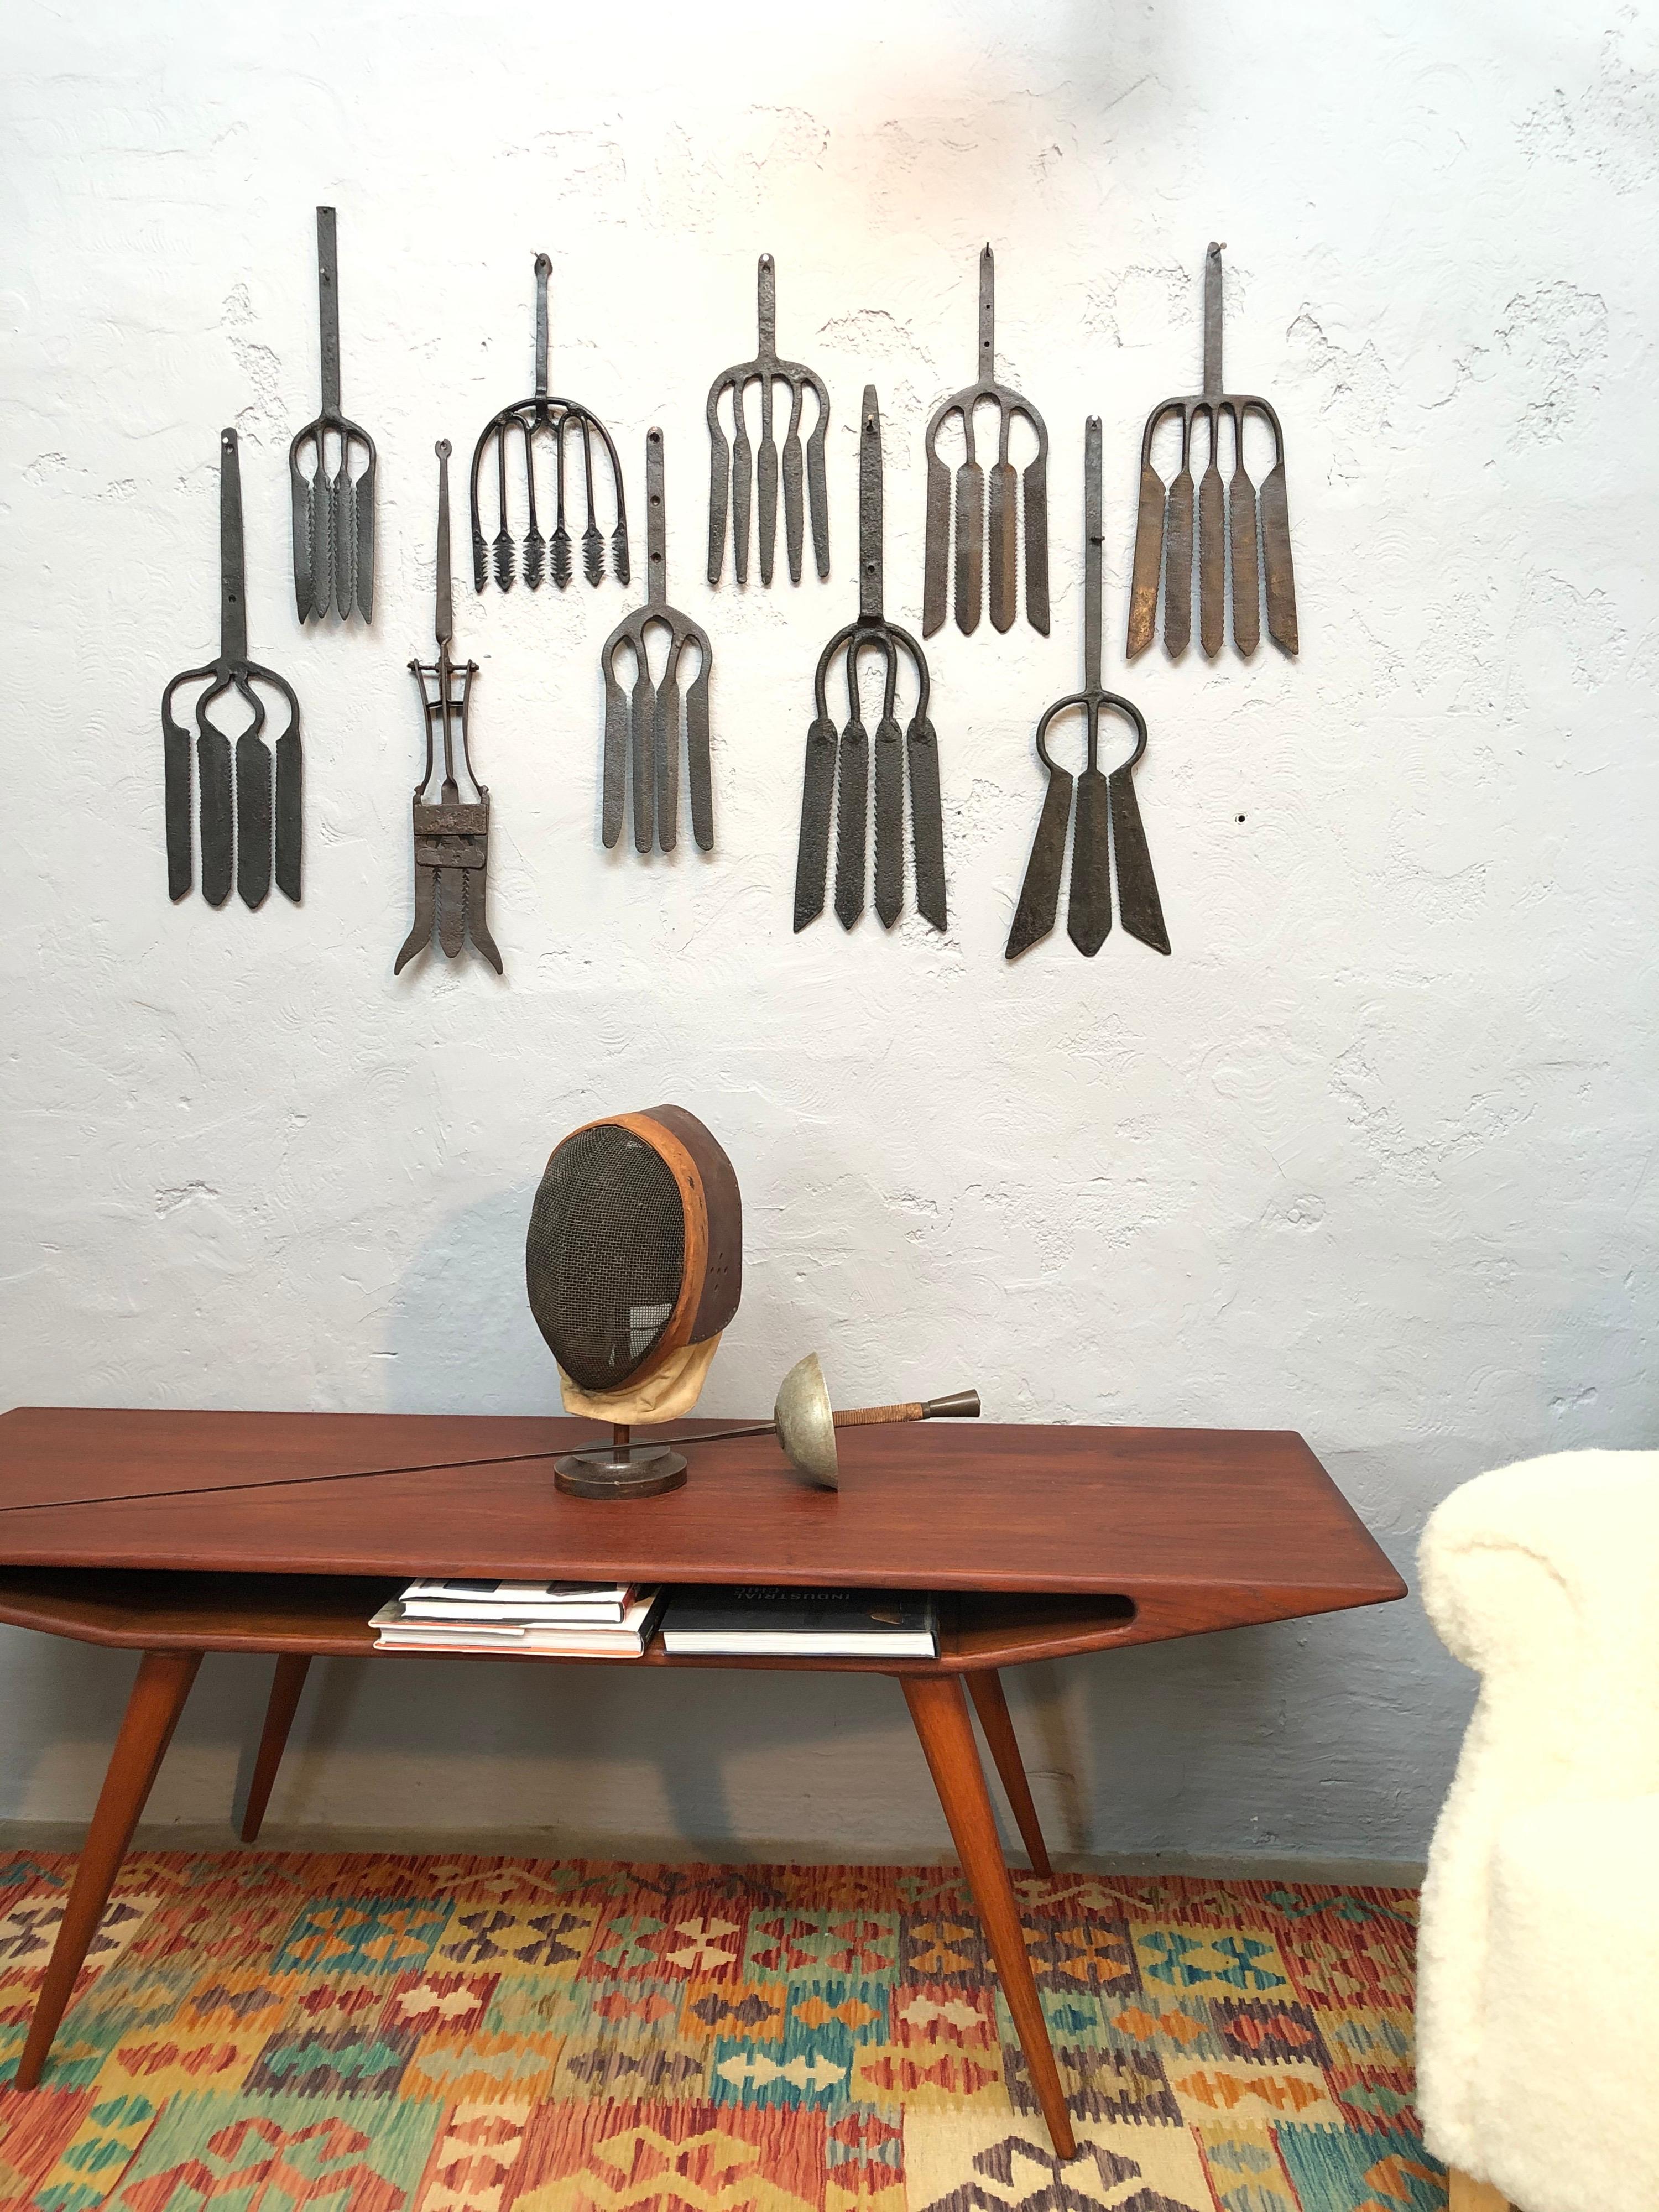 A collection of 10 wrought iron eel forks from the 18th century. 
Extremely decorative and each one unique. 
Each one is a work of art. 
Sizes vary from 36 cm to 63 cm. 
Would look amazing in a fish restaurant, bar, club or even in your home.
In